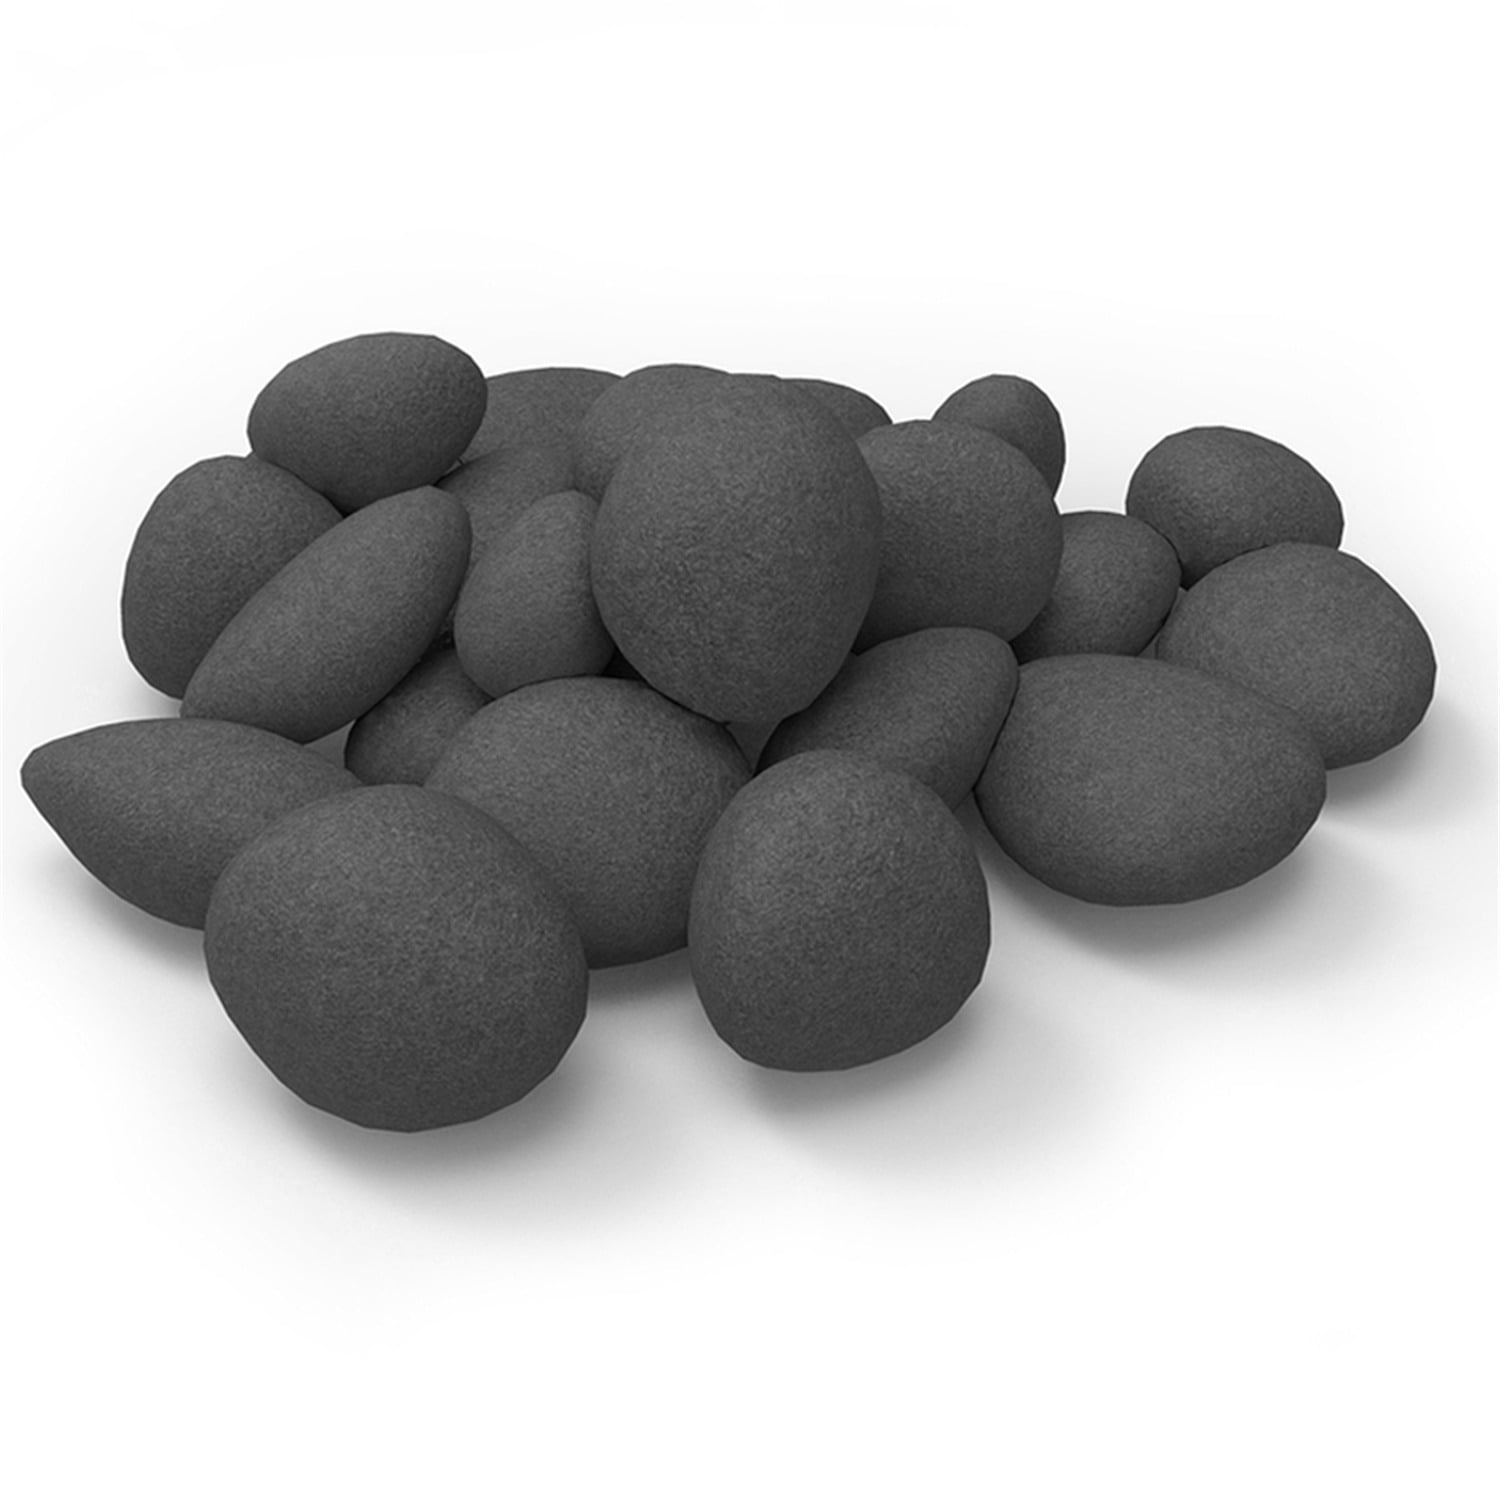 Ceramic Pebbles for Fire Pit or Fireplaces, Black, Set of 24